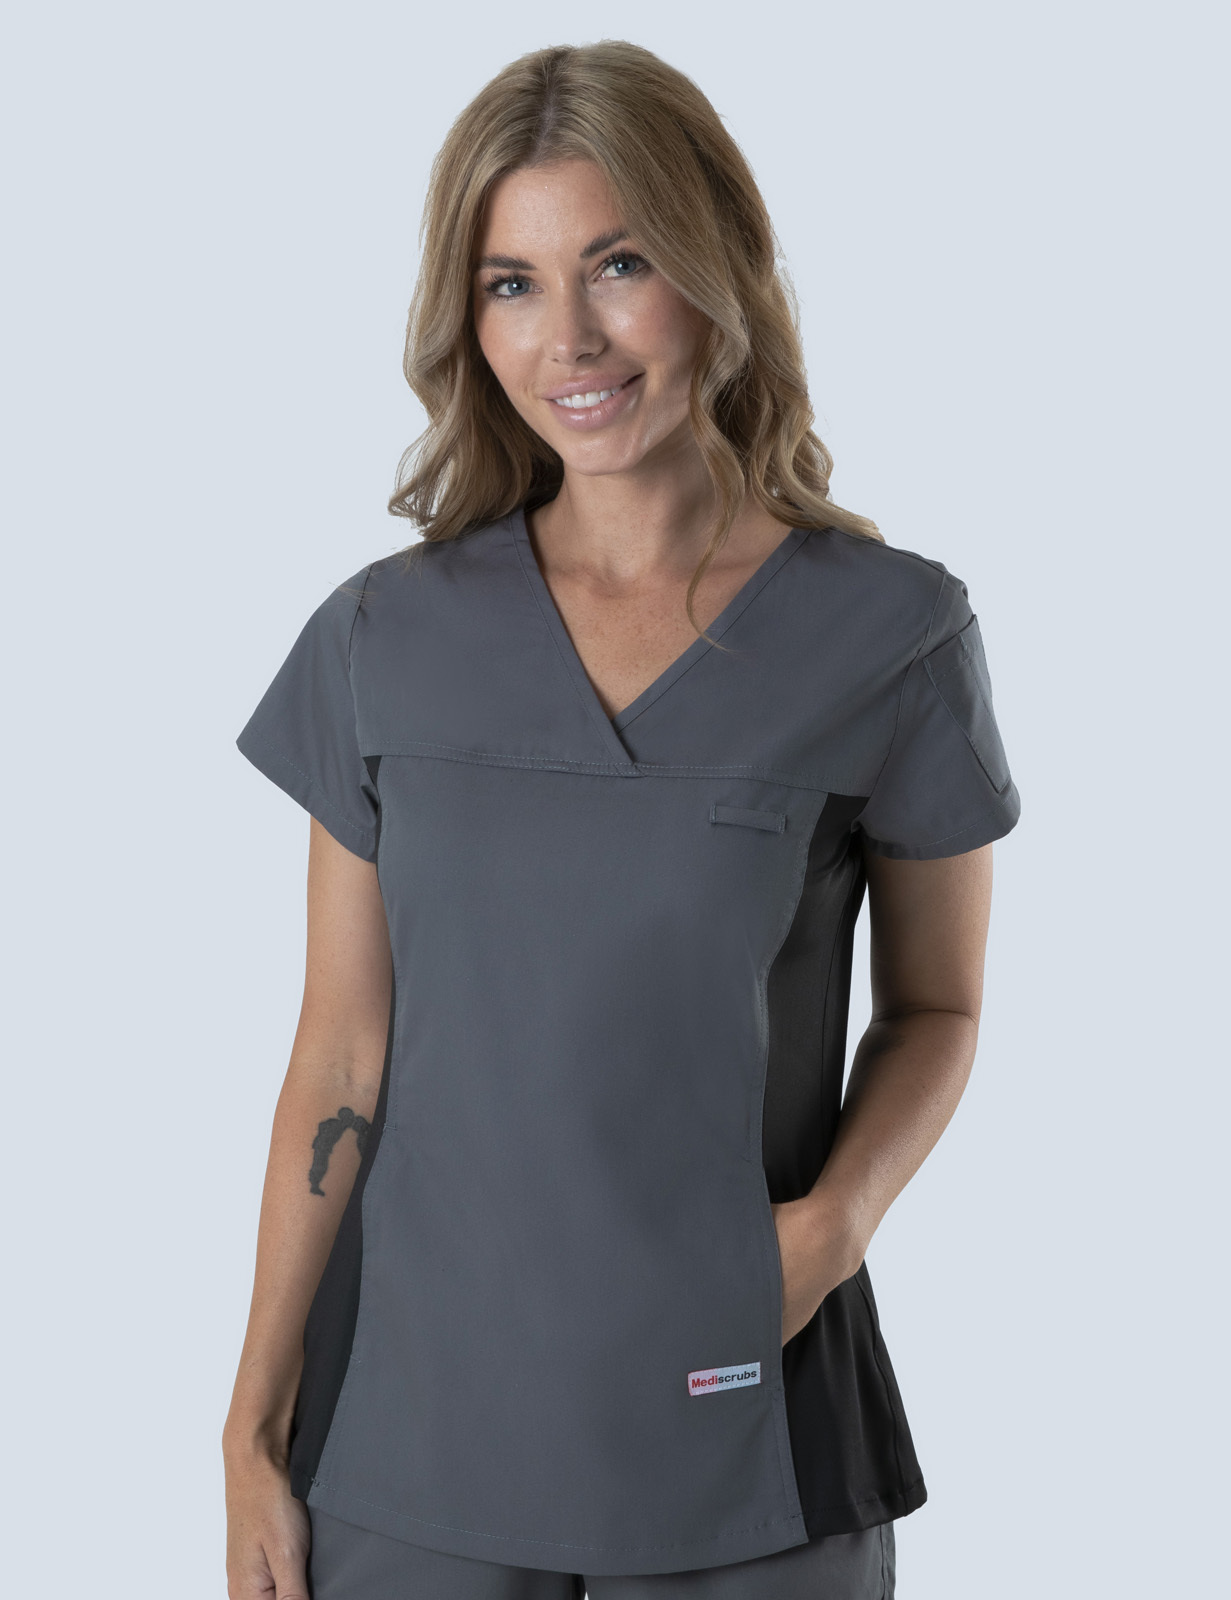 Gladstone Hospital - HDU (Women's Fit Spandex Scrub Top and Cargo Pants in Steel Grey incl Logos)